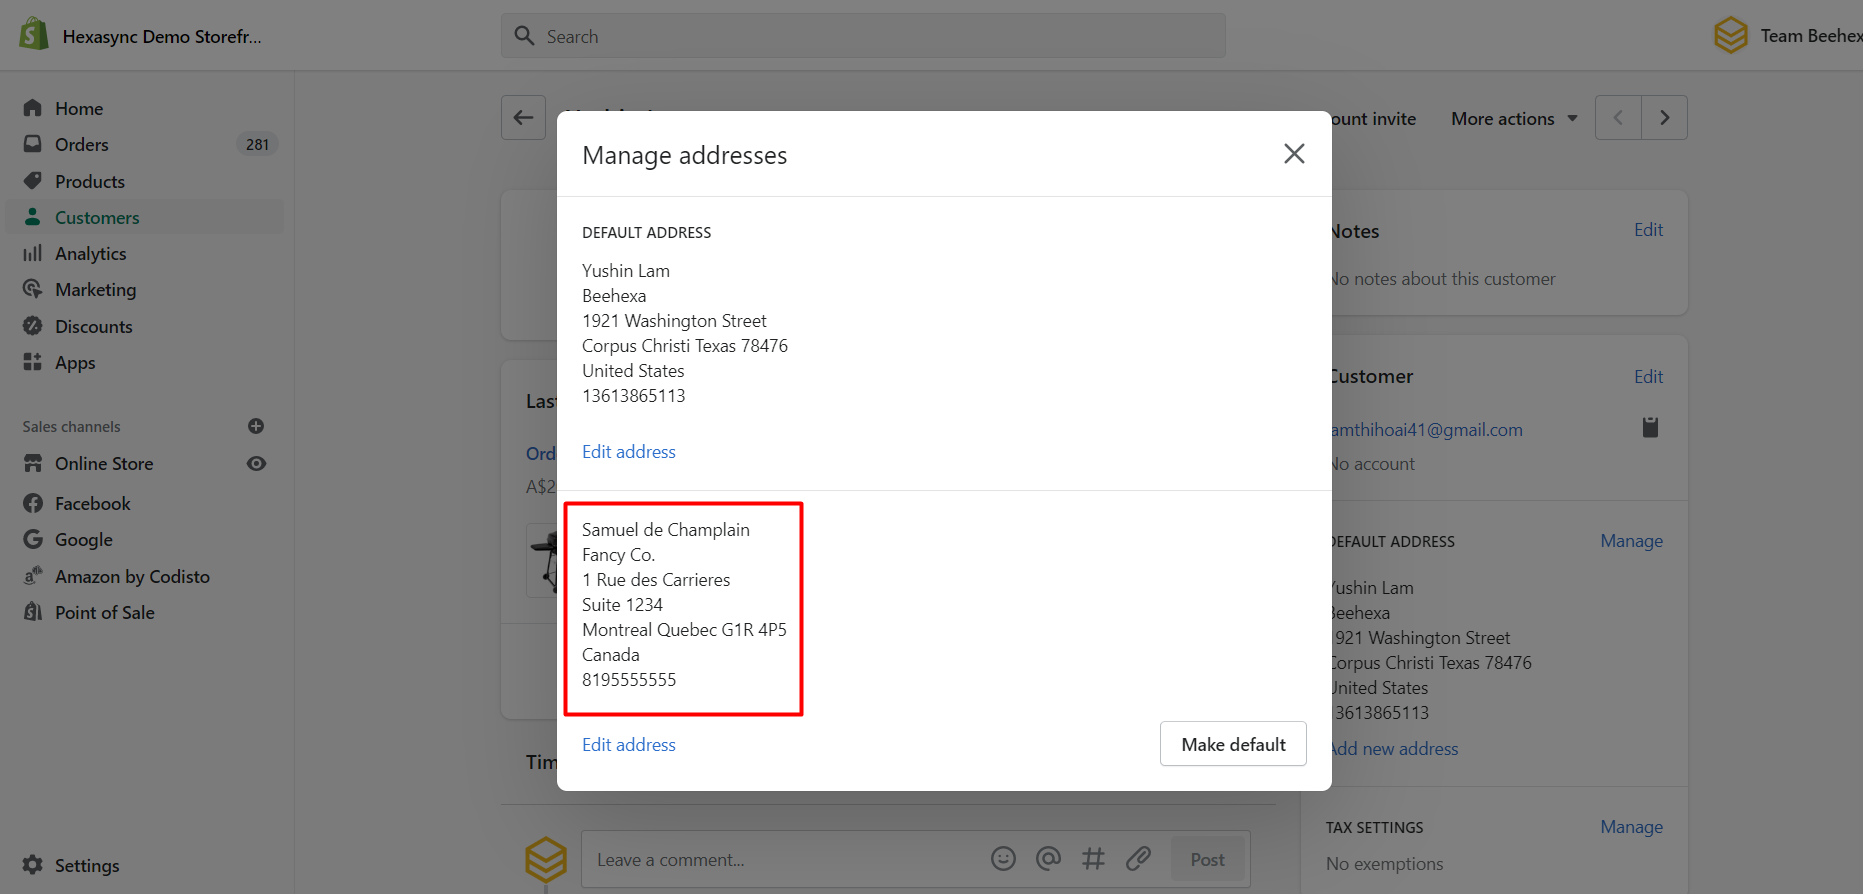 create a new address for a customer using Postman